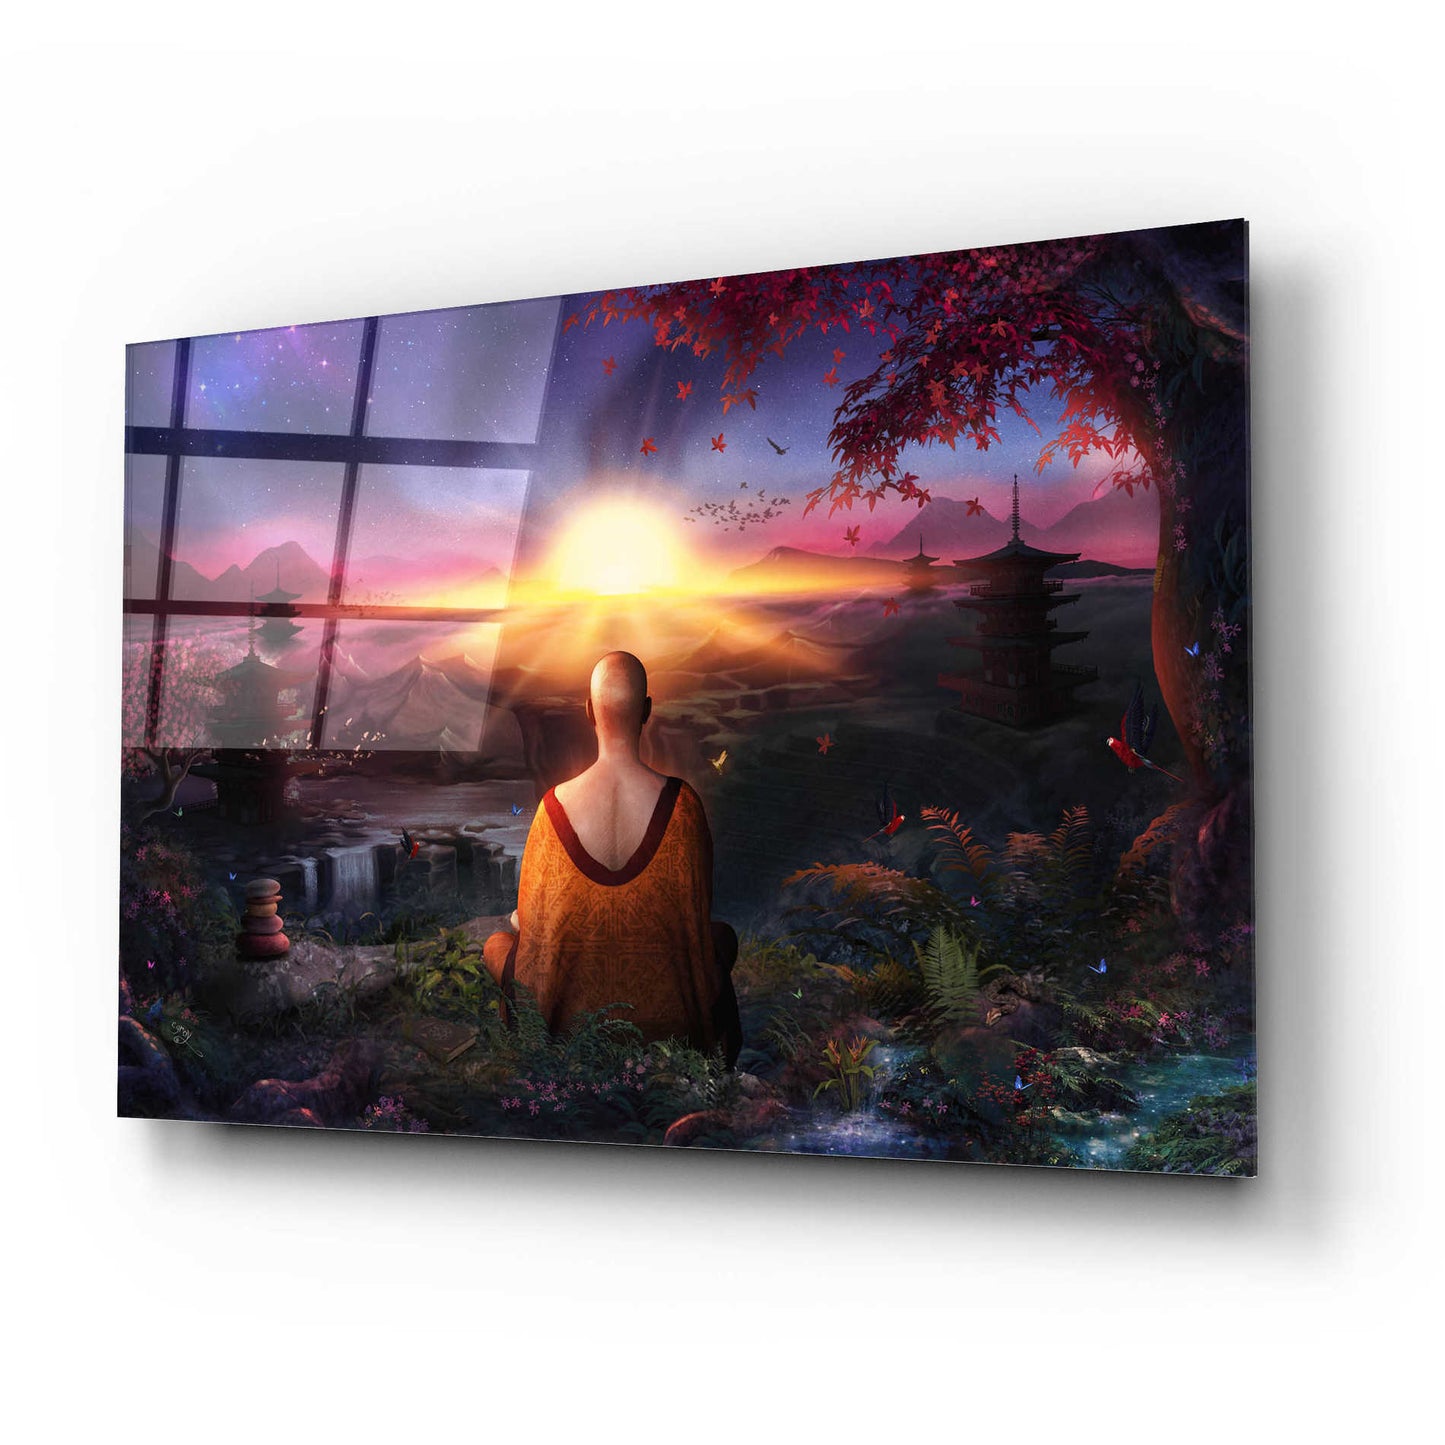 Epic Art 'A Magical Existence' by Cameron Gray Acrylic Glass Wall Art,24x16